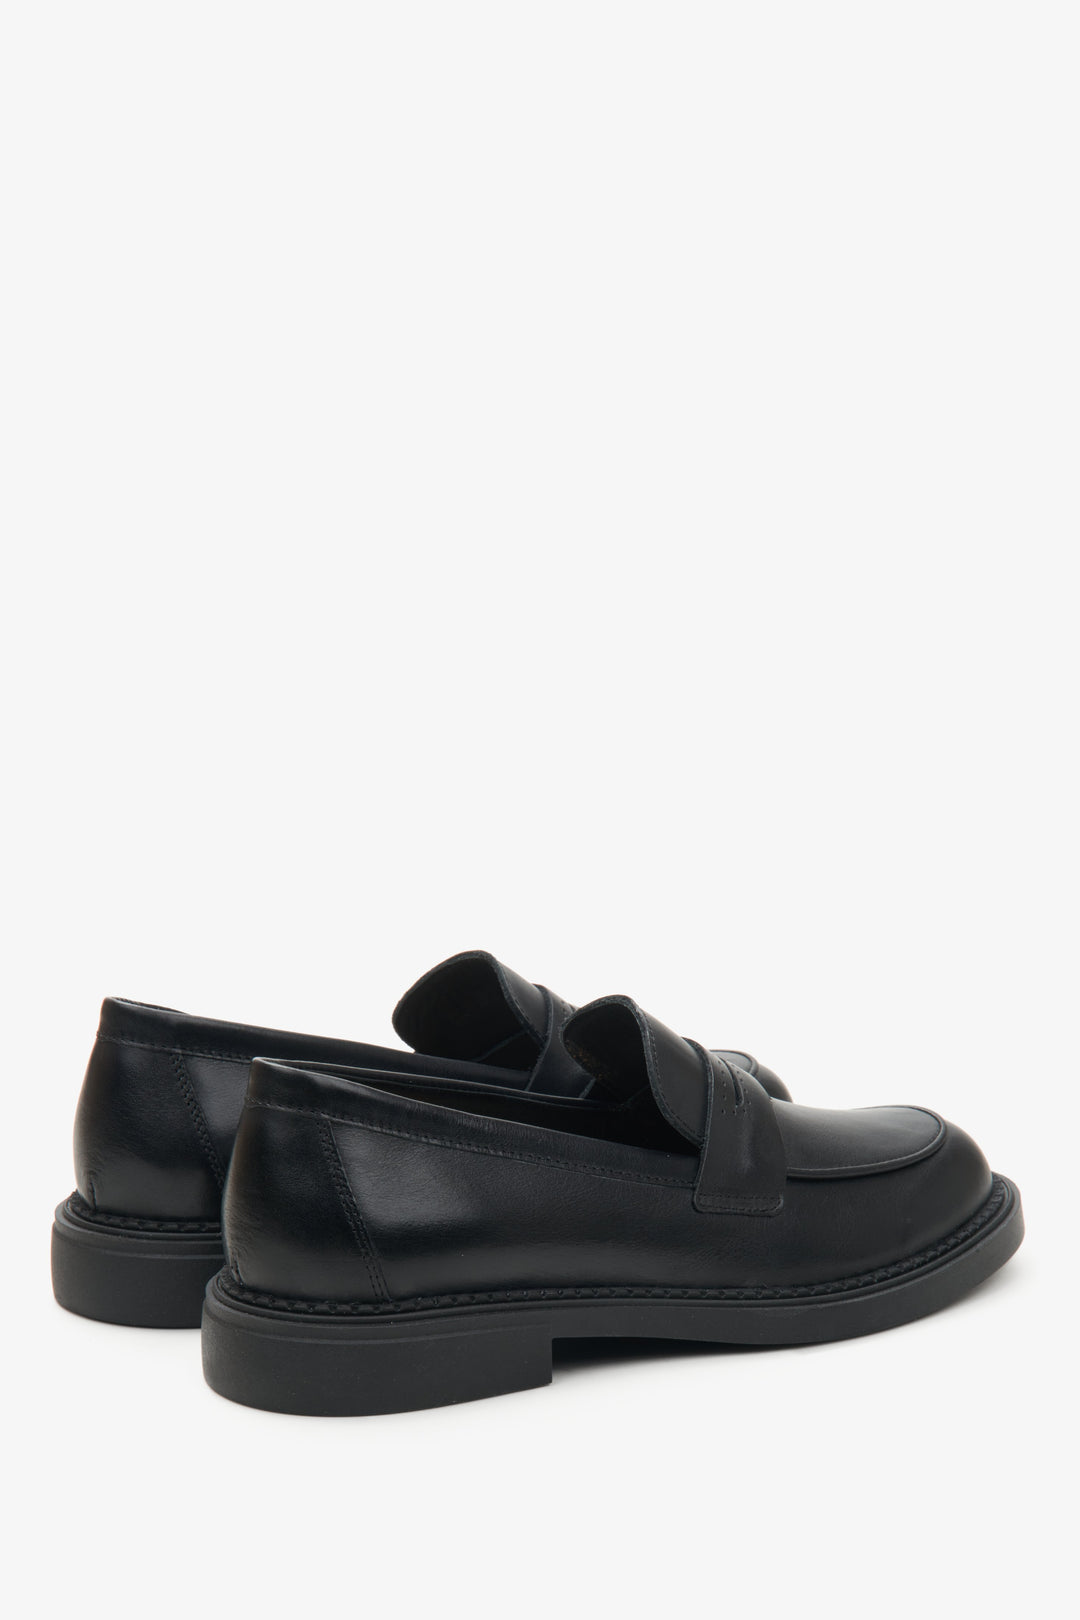 Estro women's black  loafers made of genuine Italian leather - close-up on the heel and side line of the shoes.